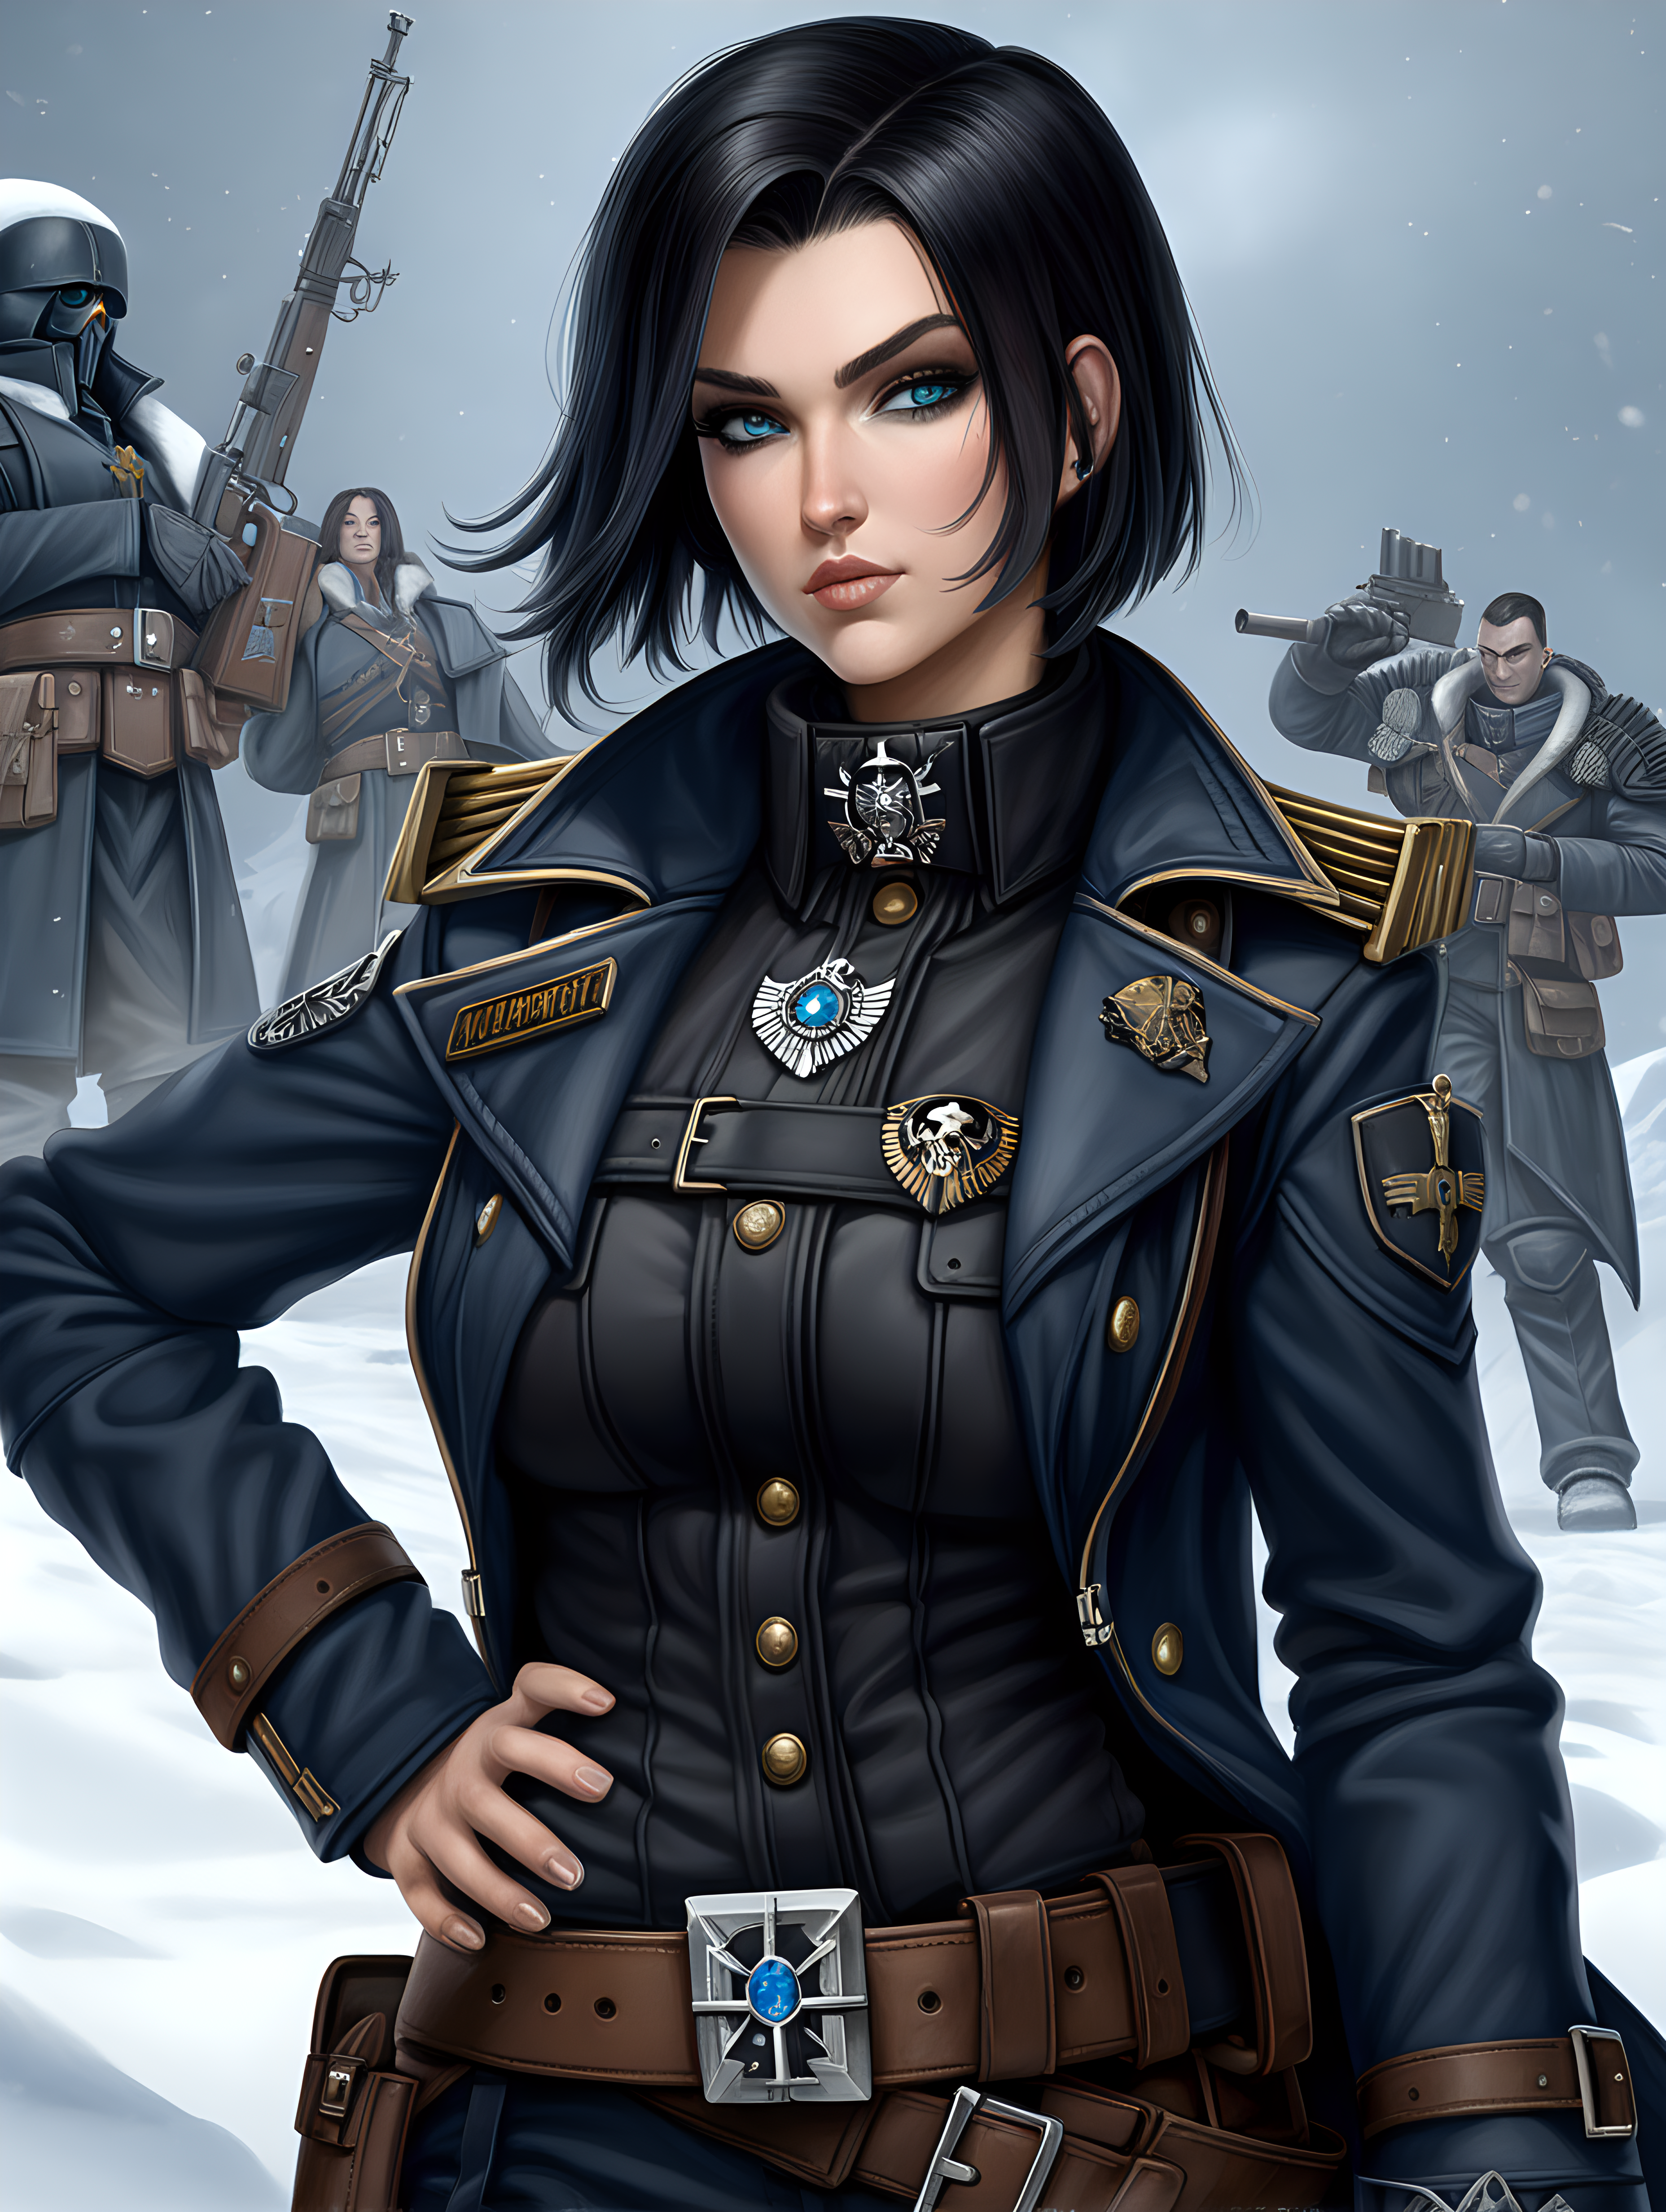 Warhammer 40K young busty Commissar woman. She has an hourglass shape. She has raven black hair. She has a very short hair style similar to what Maya, from Borderlands 2, has. Dark black uniform. Dark brown belt has a lot of pouches, grenades, and a black holster attached. Dark brown bandolier around waist. Her dark black uniform jacket fits perfectly and is closed up. She has a lot of eye shadow. Background scene is snowy trench line. She has icy blue eyes. Her uniform has some Norse runes on the collar and epaulettes. She is wearing warm clothes.